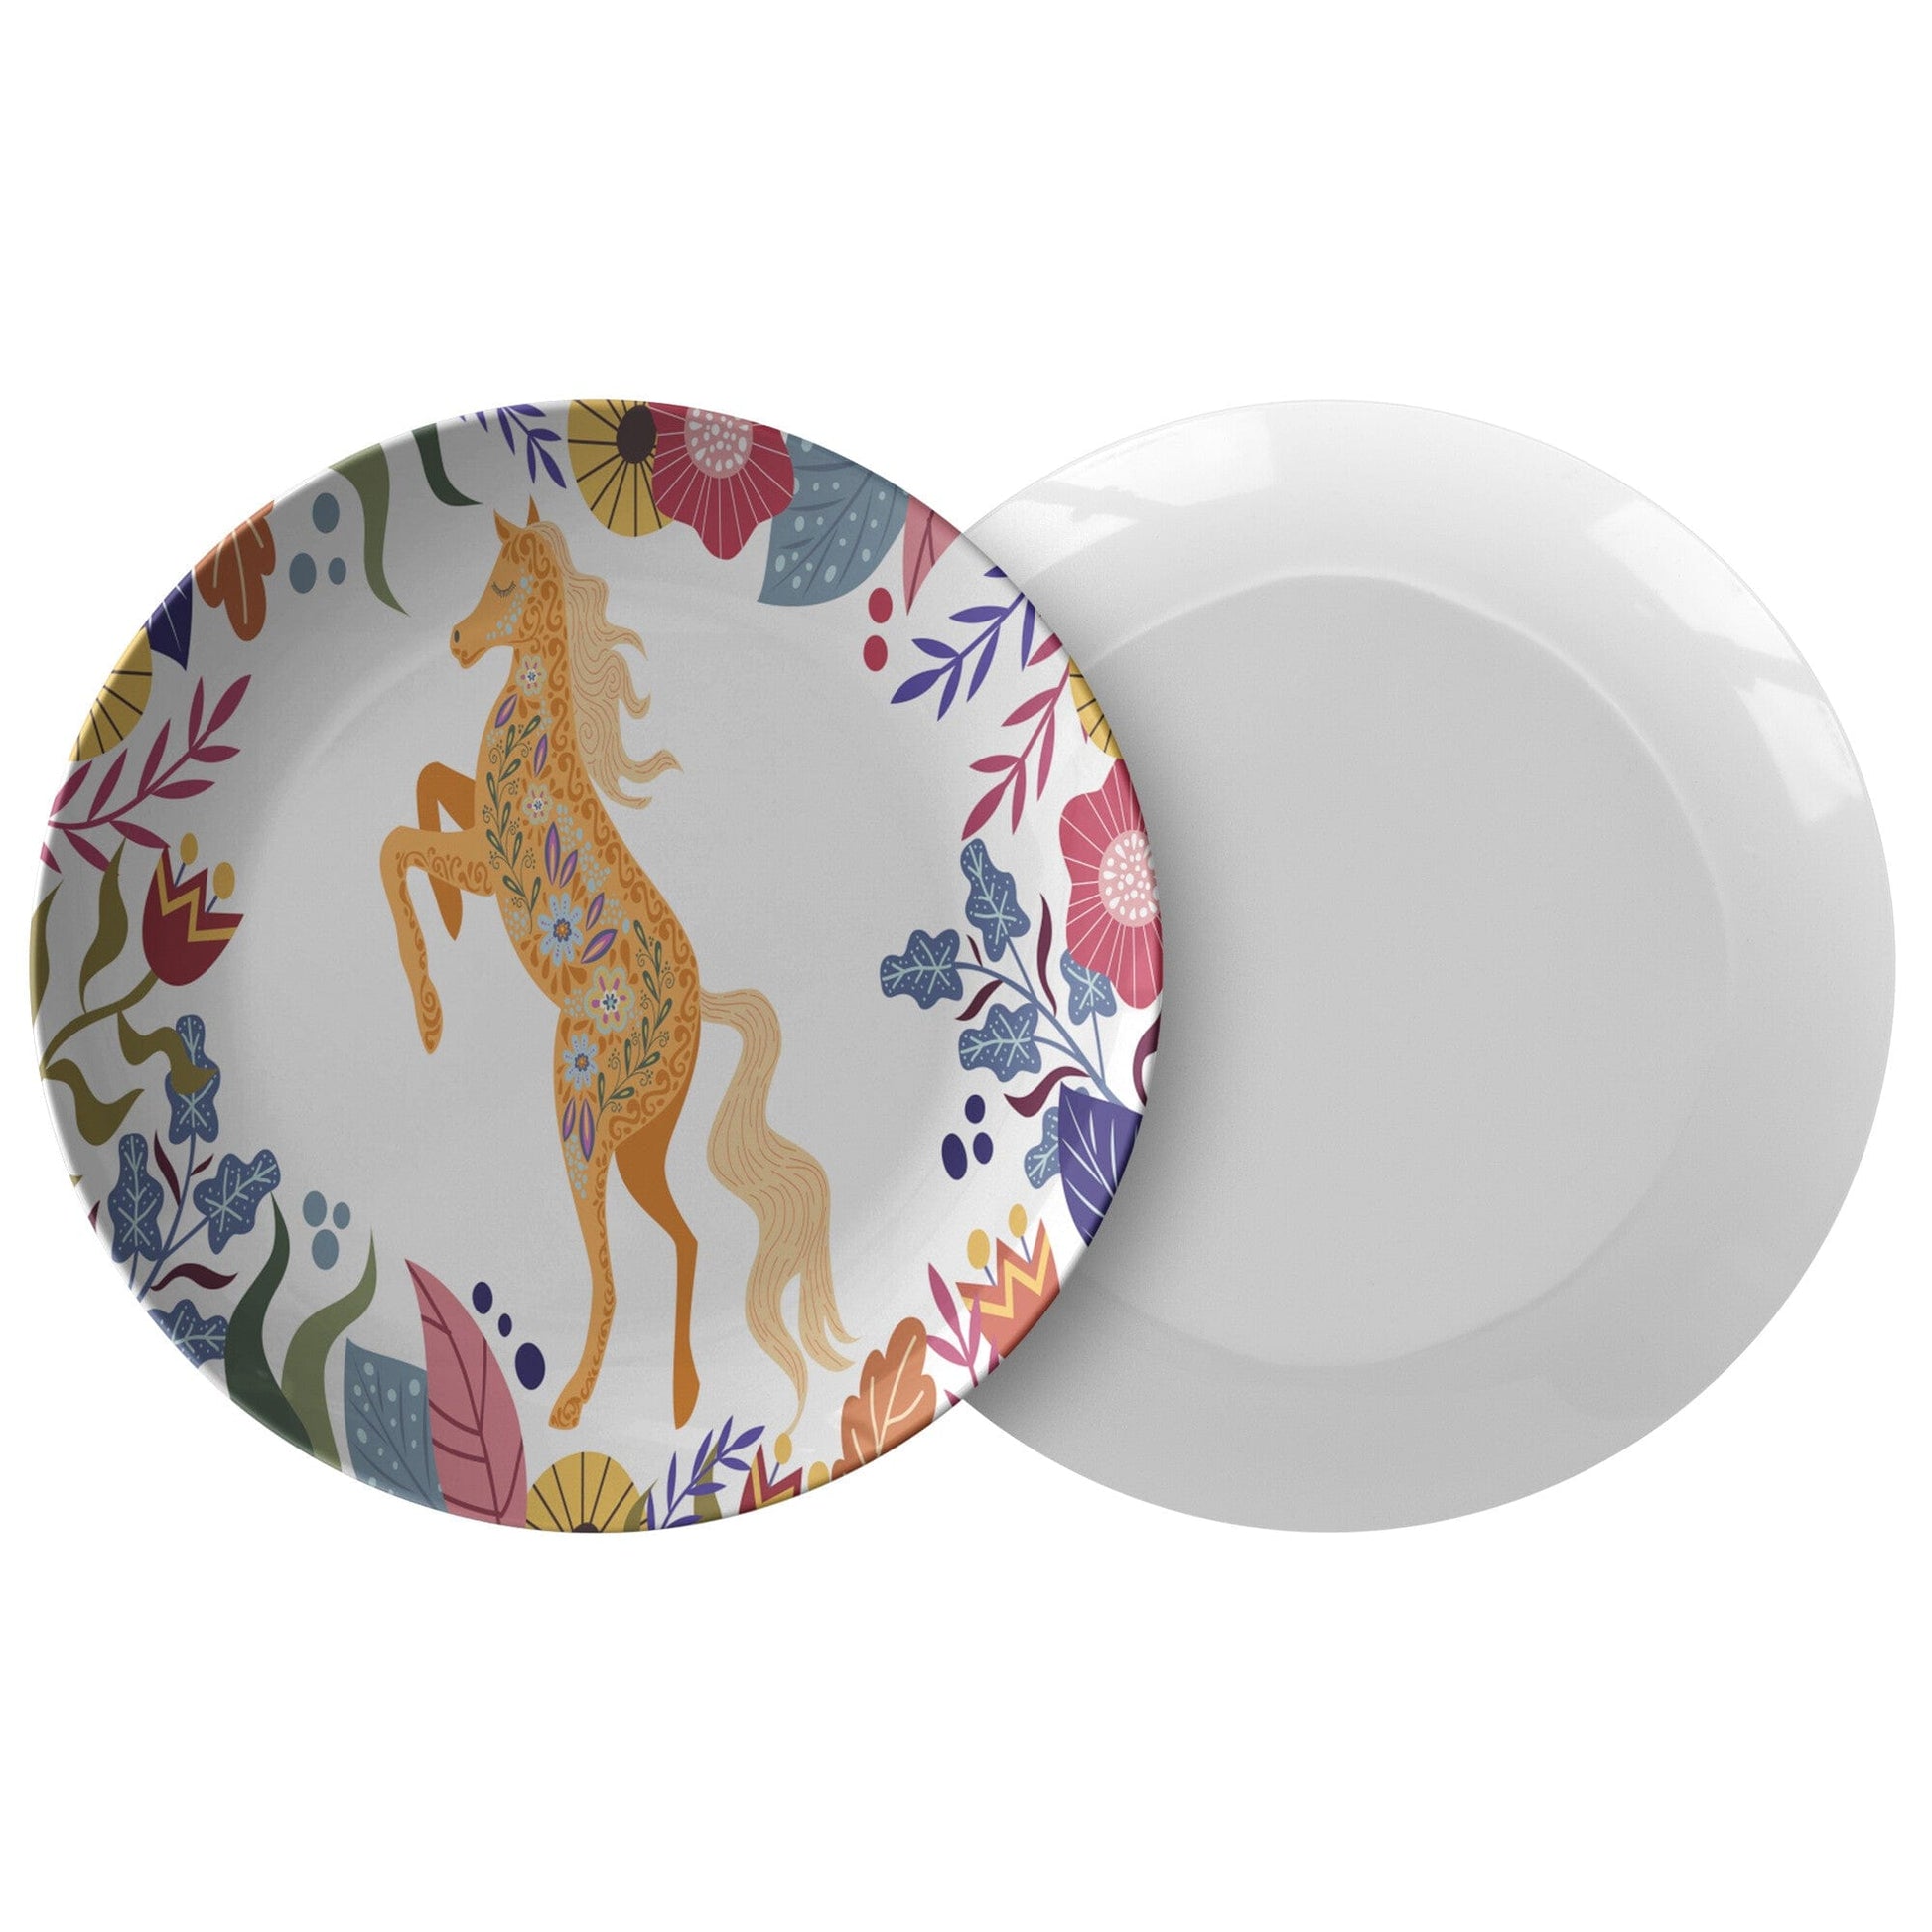 Kate McEnroe New York Horse in Summer Bloom Dinner Plates, Floral Dinnerware, Folk Horse with Colorful Flowers, Equestrian ThermoSāf Dishes, Folk Art Dinner Dish Plates